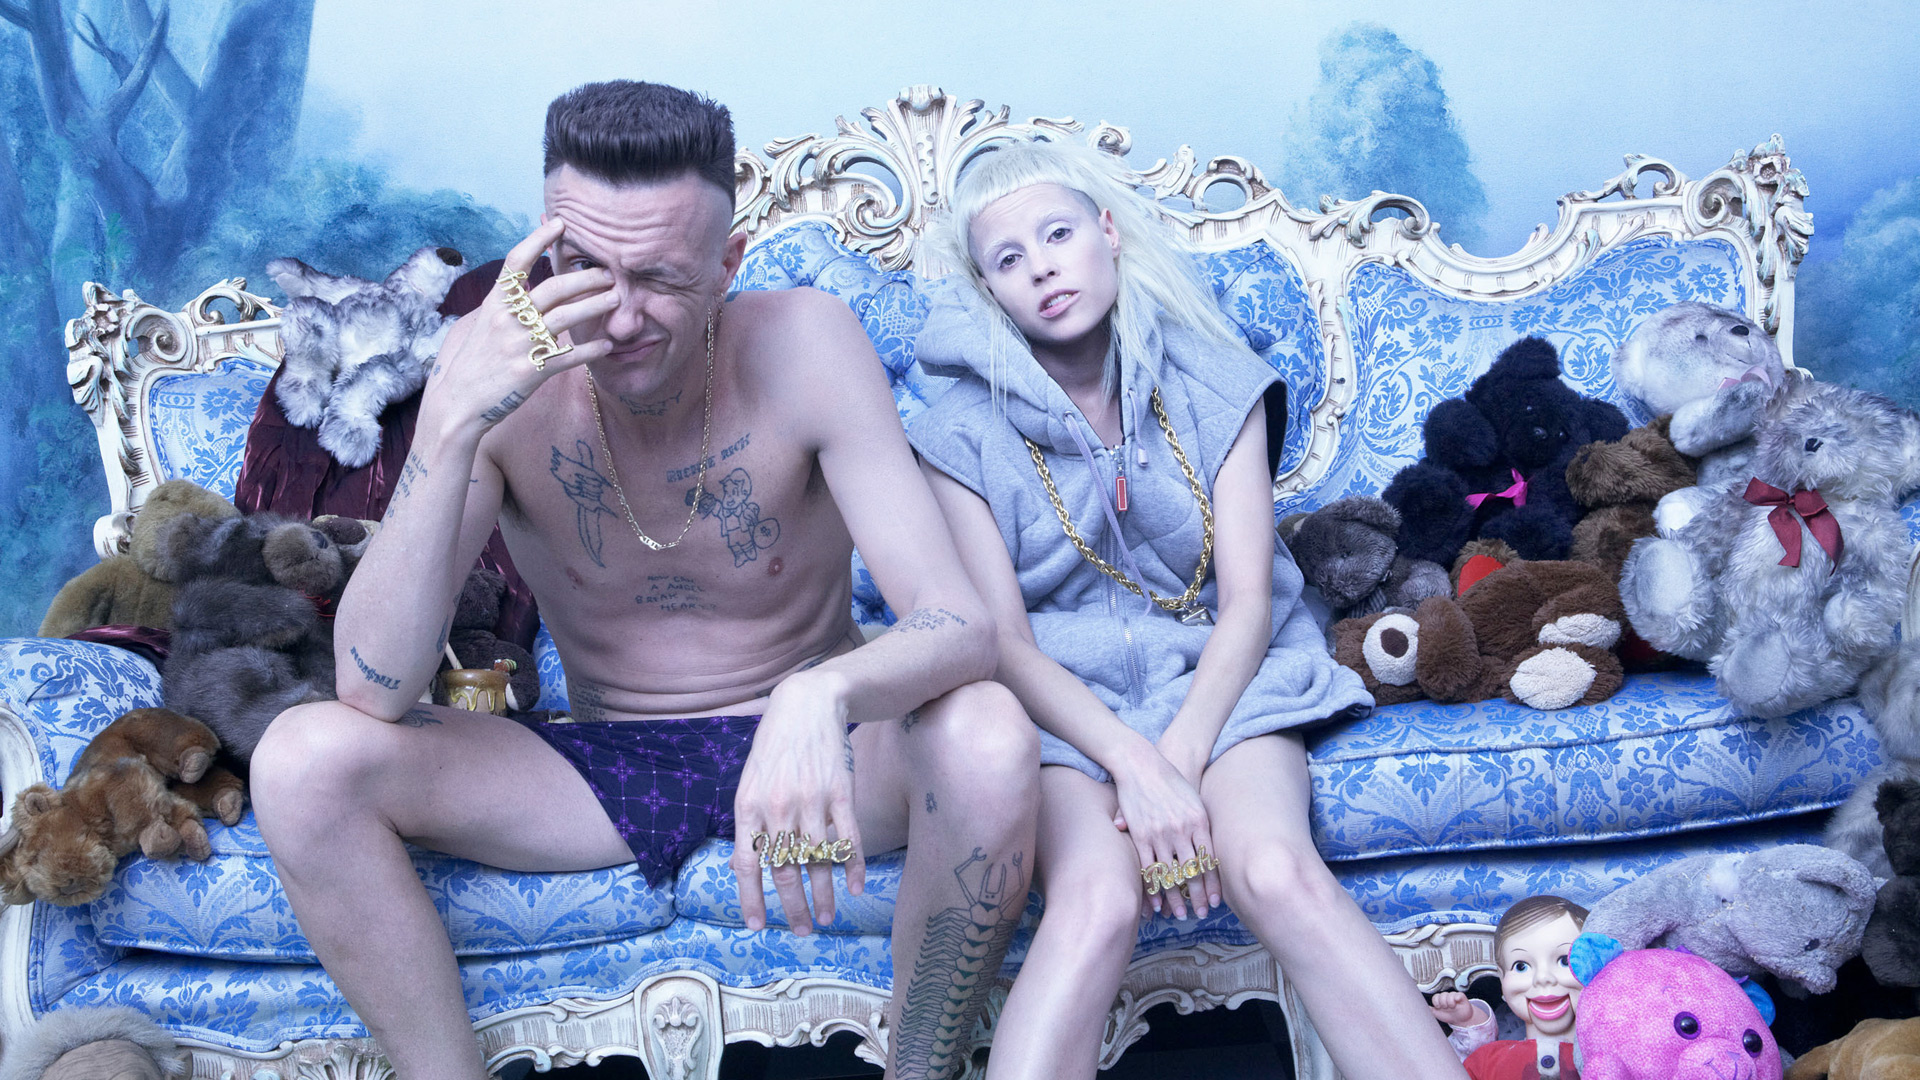 Die Antwoord: A South African rap-rave group composed of rappers Ninja and Yolandi Visser and producer God. 1920x1080 Full HD Background.